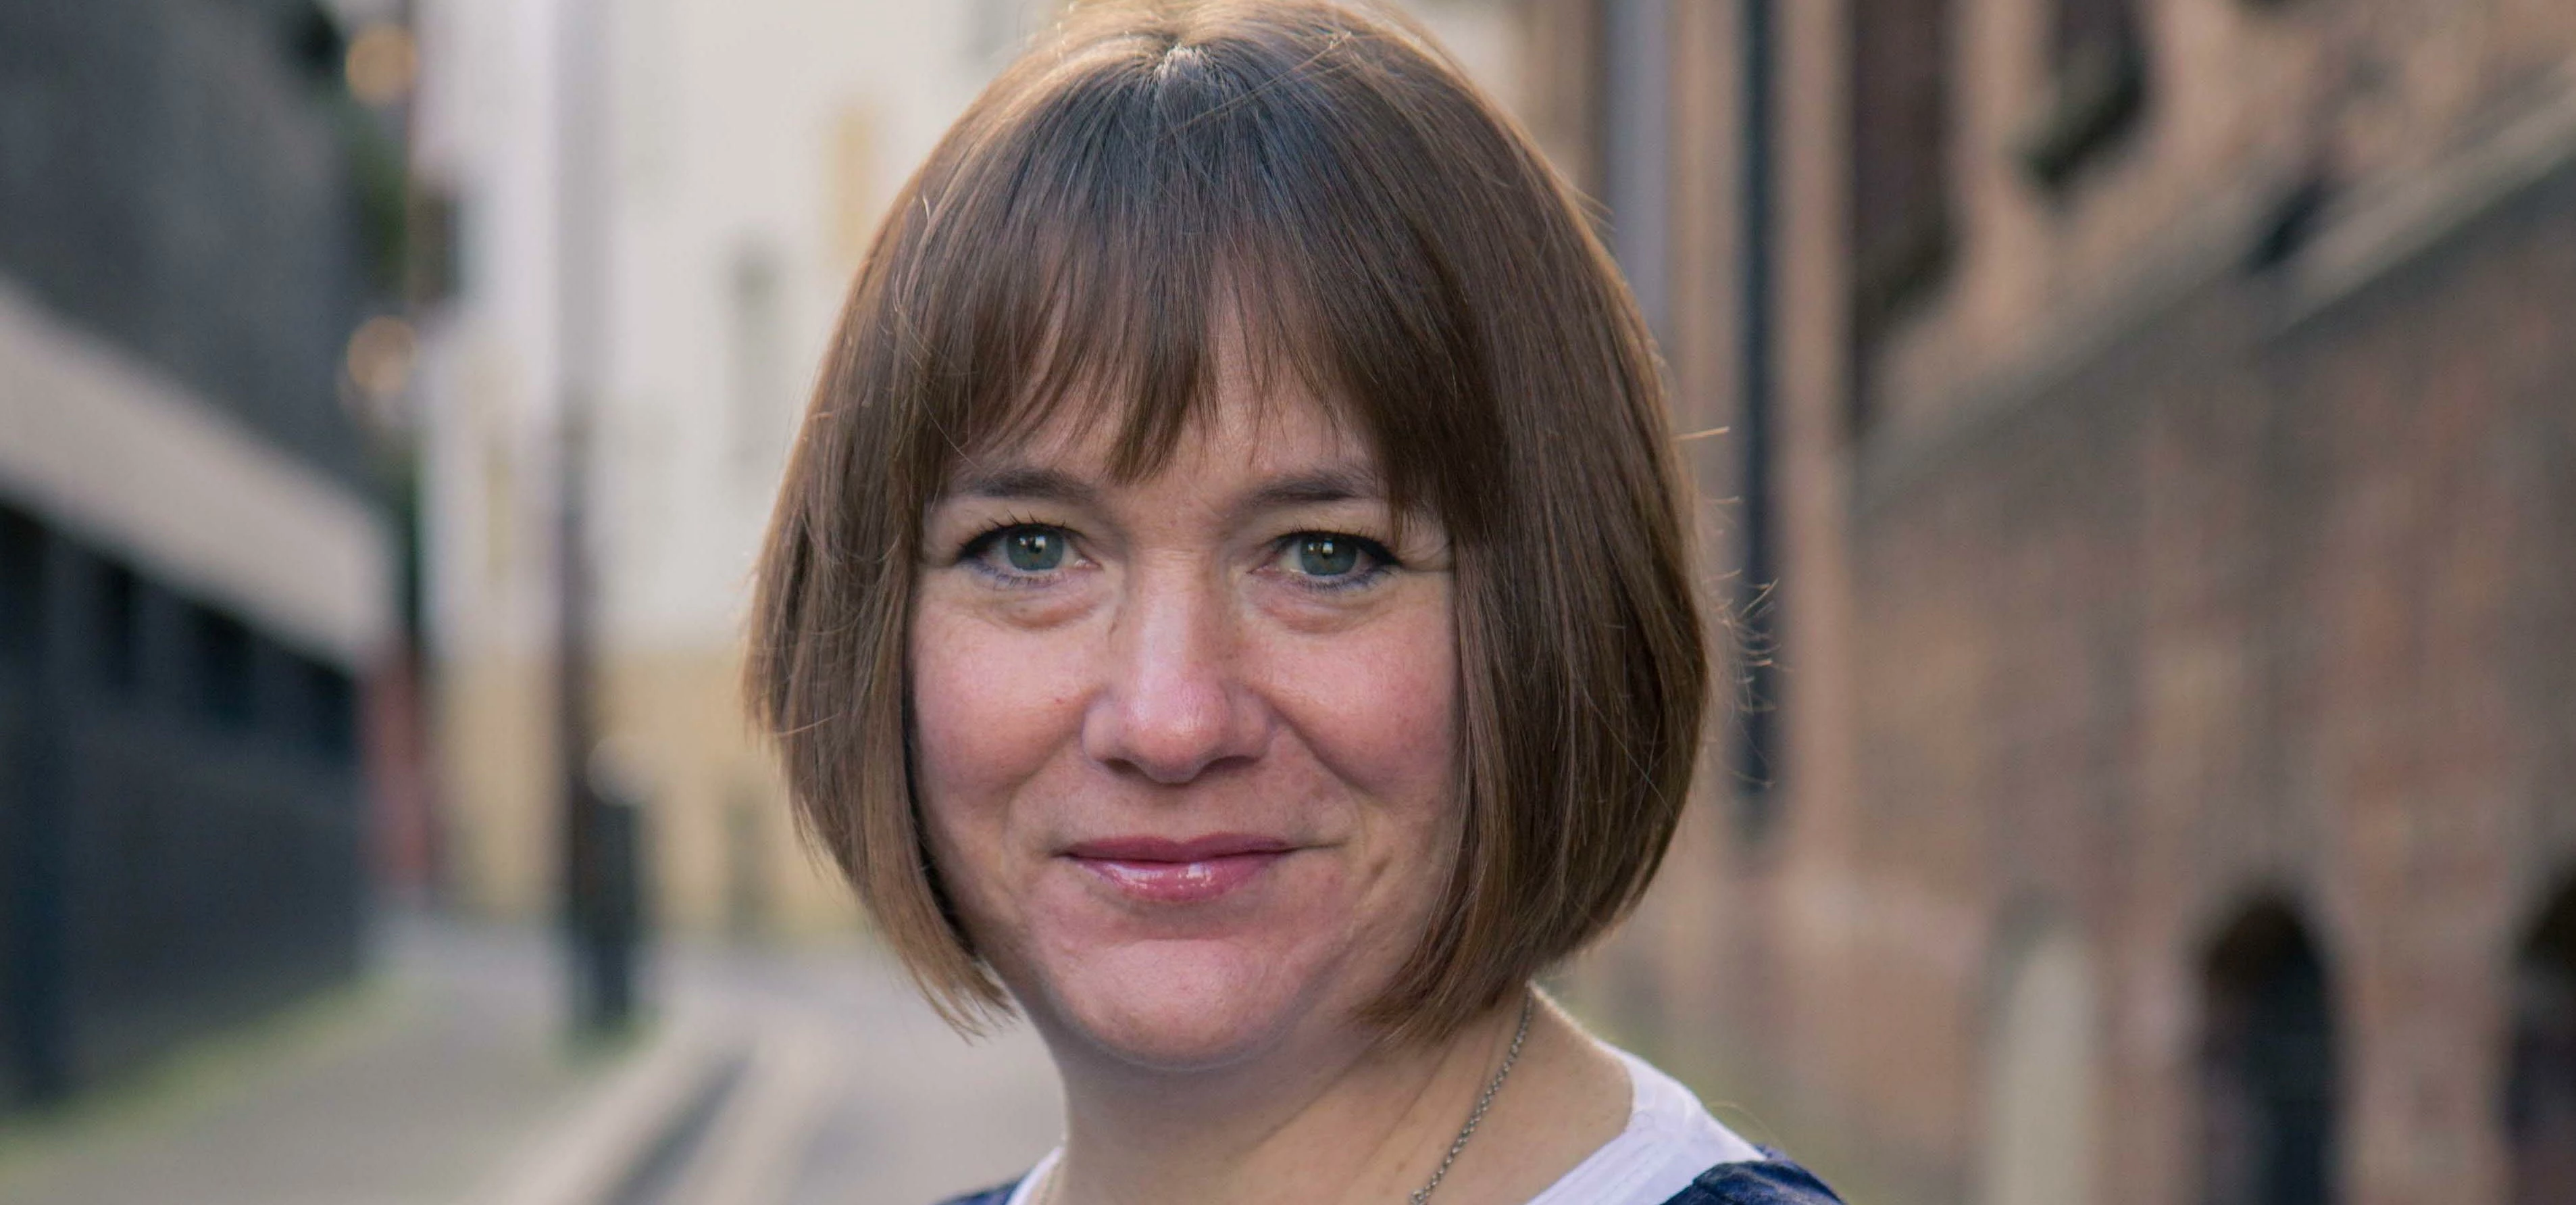 Anna Appleford is promoted to senior research director